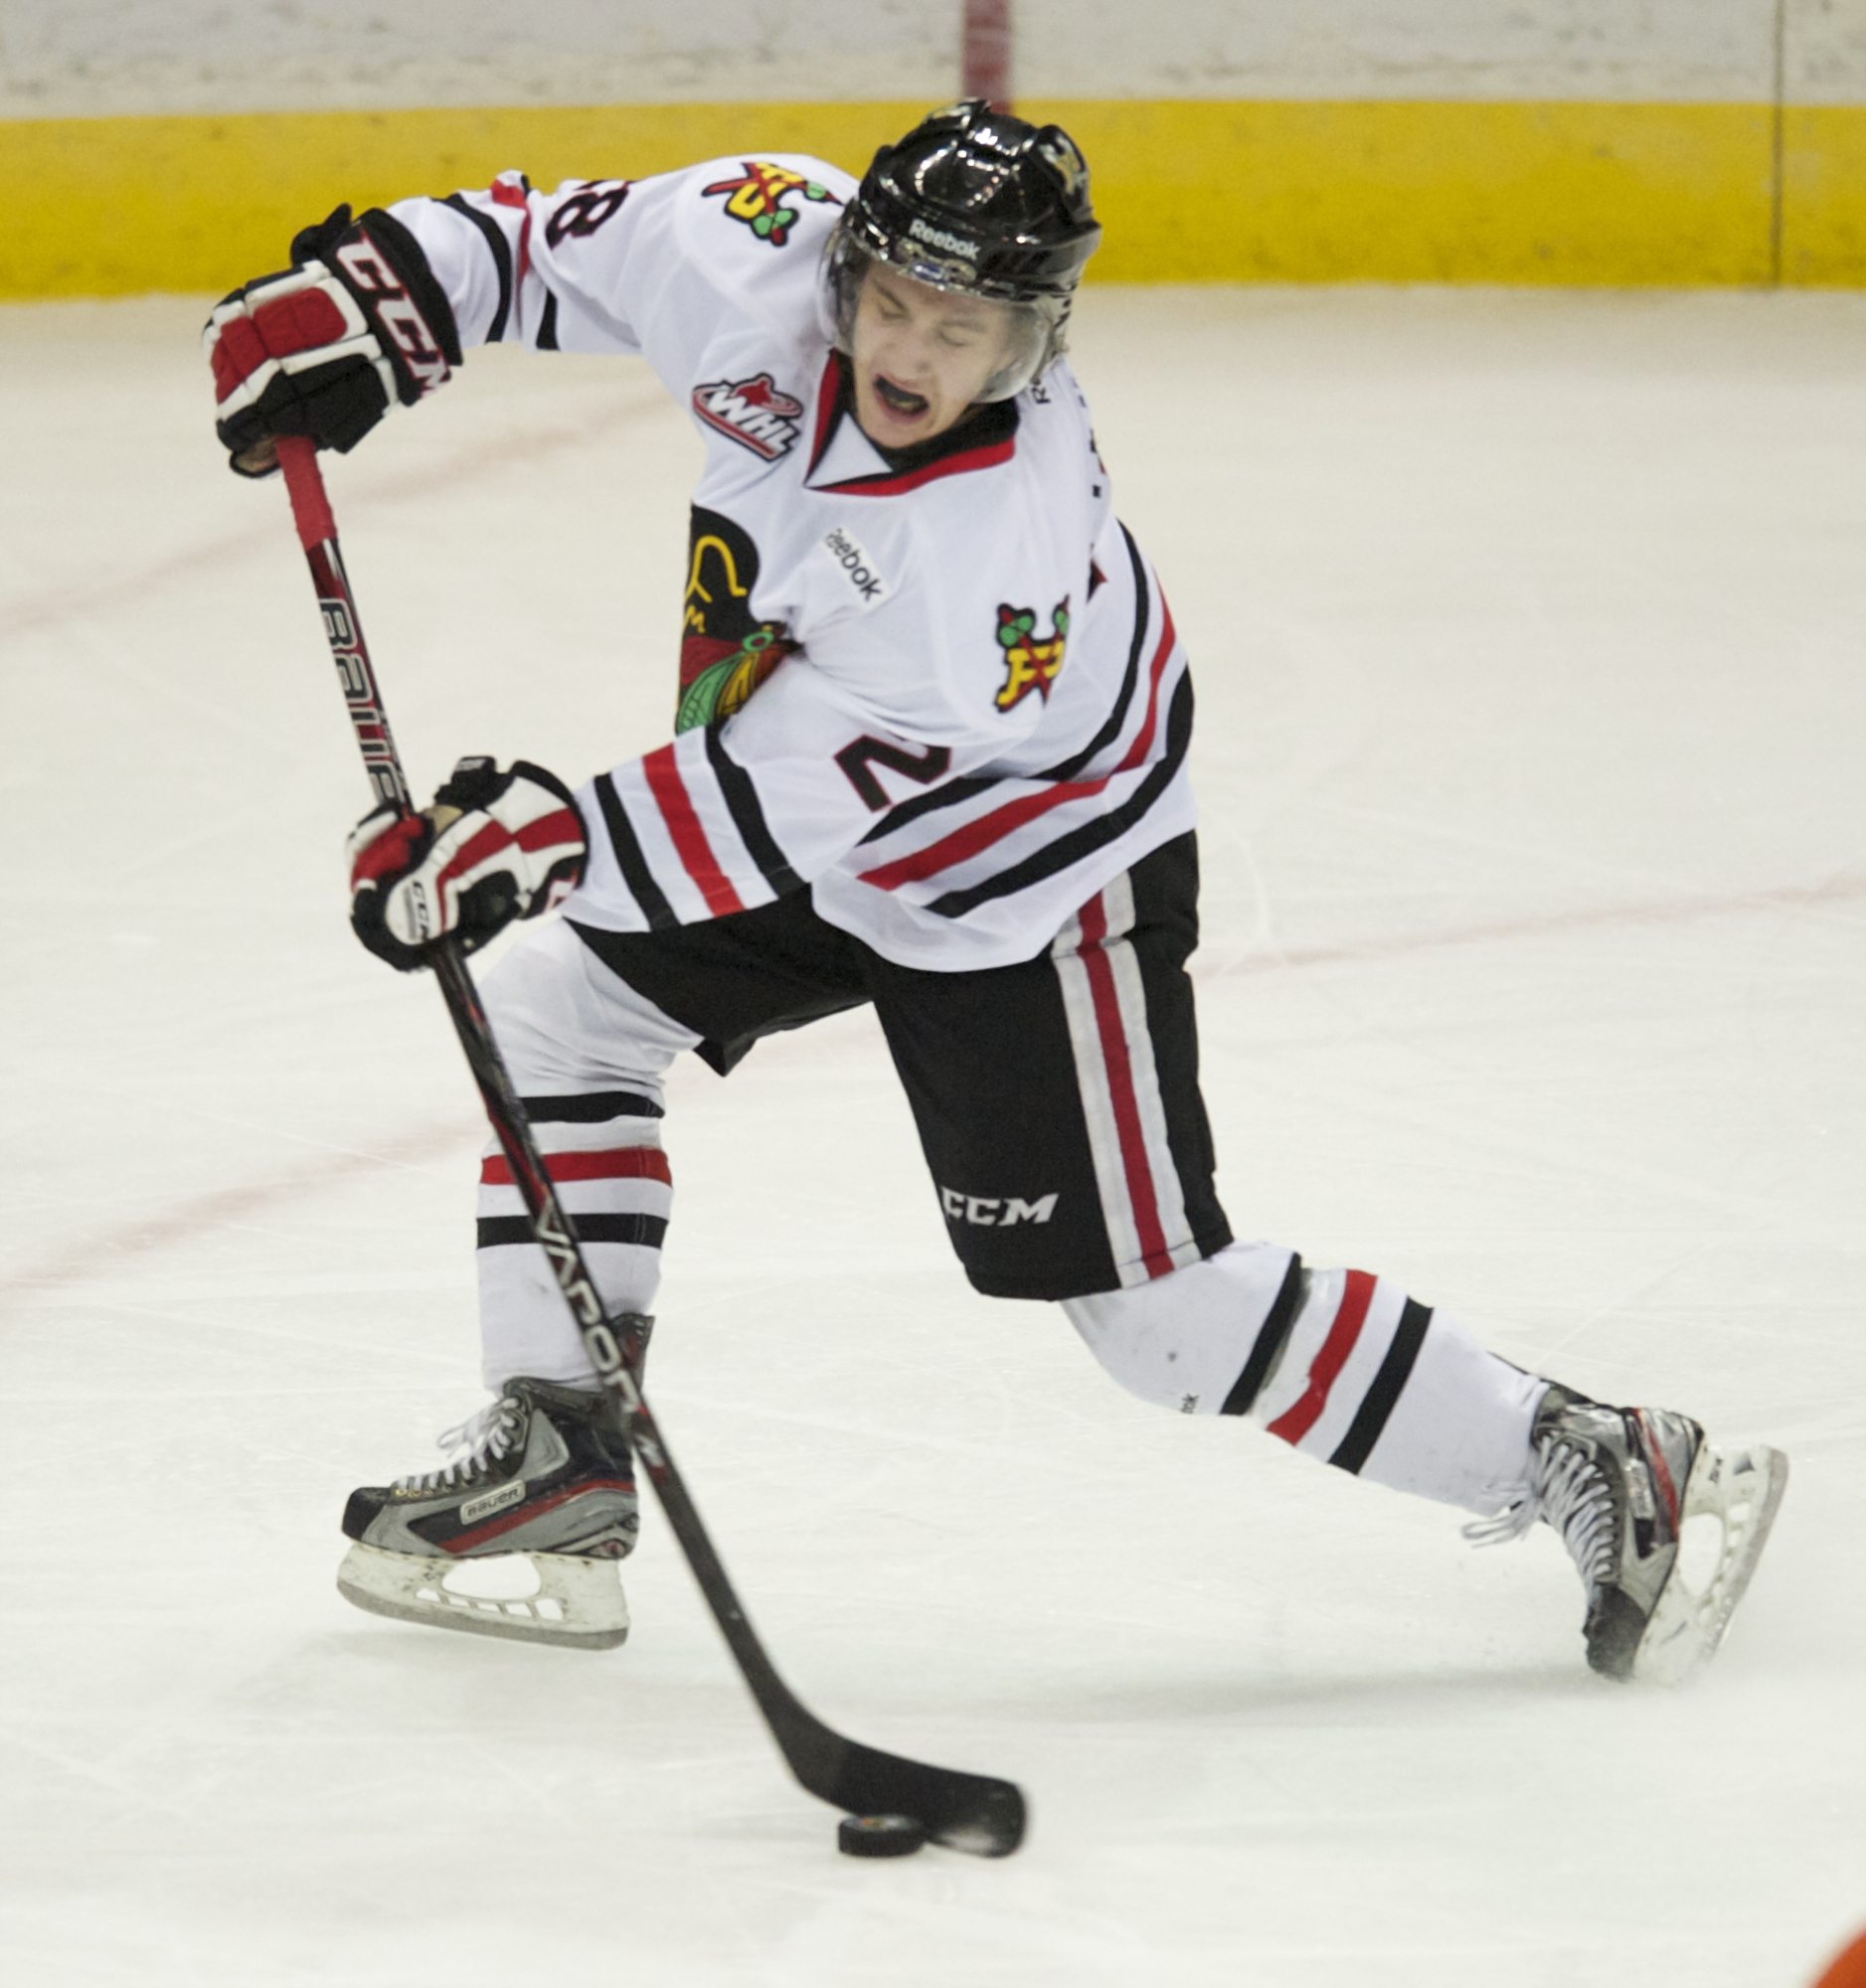 Steven Lane/The Columbian
The Winterhawks' Brenden Leipsic scores the second goal in a 2-0 win over Kamloops in Game 7 of the WHL Western Conference playoffs series.